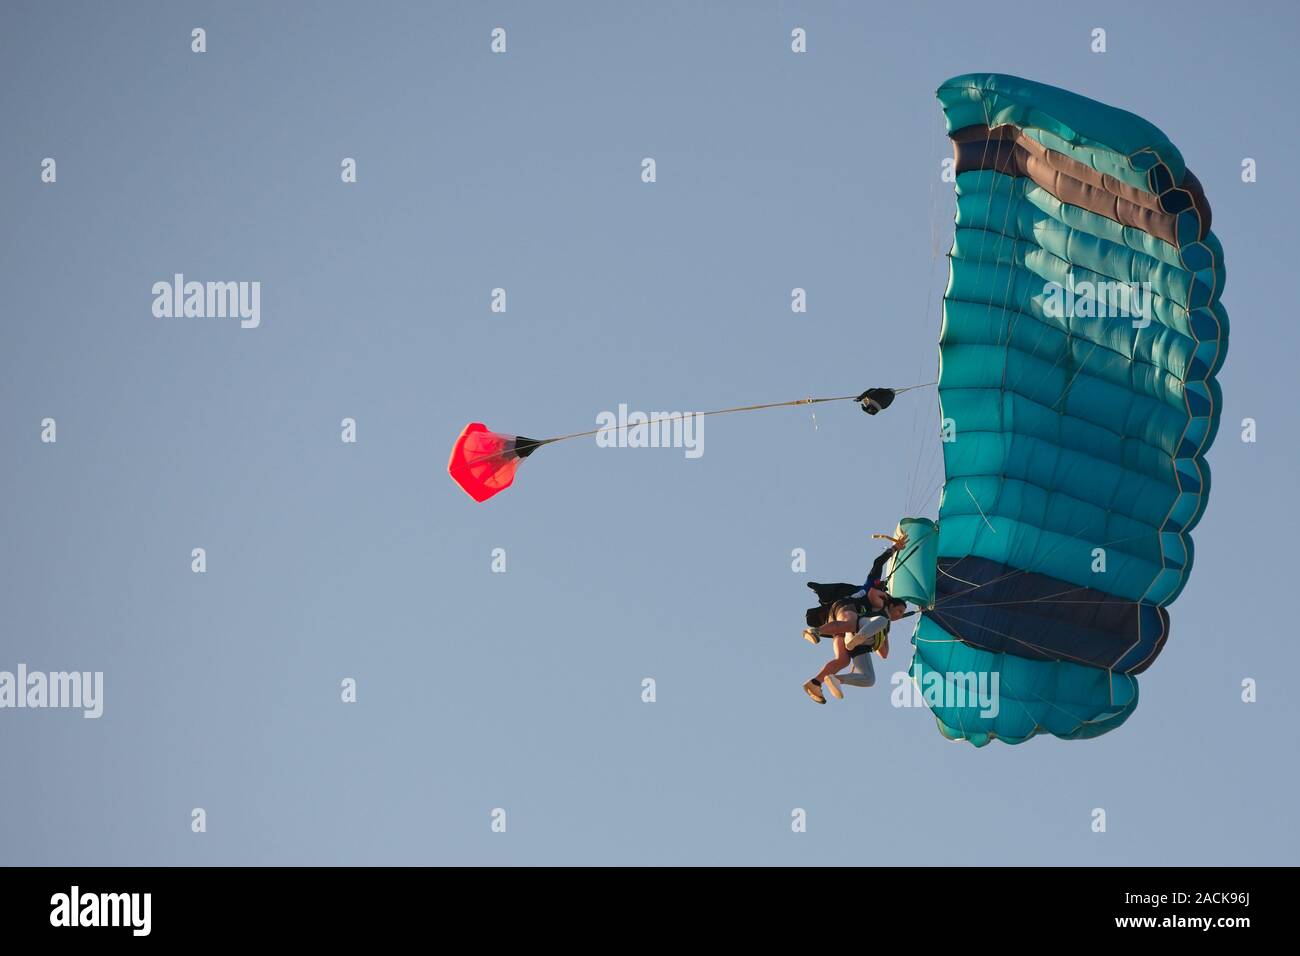 Currimundi, Qld, Australia - September 22, 2019: Tandem skydiving is popular by tourists who visiting the Sunshine Coast. Stock Photo